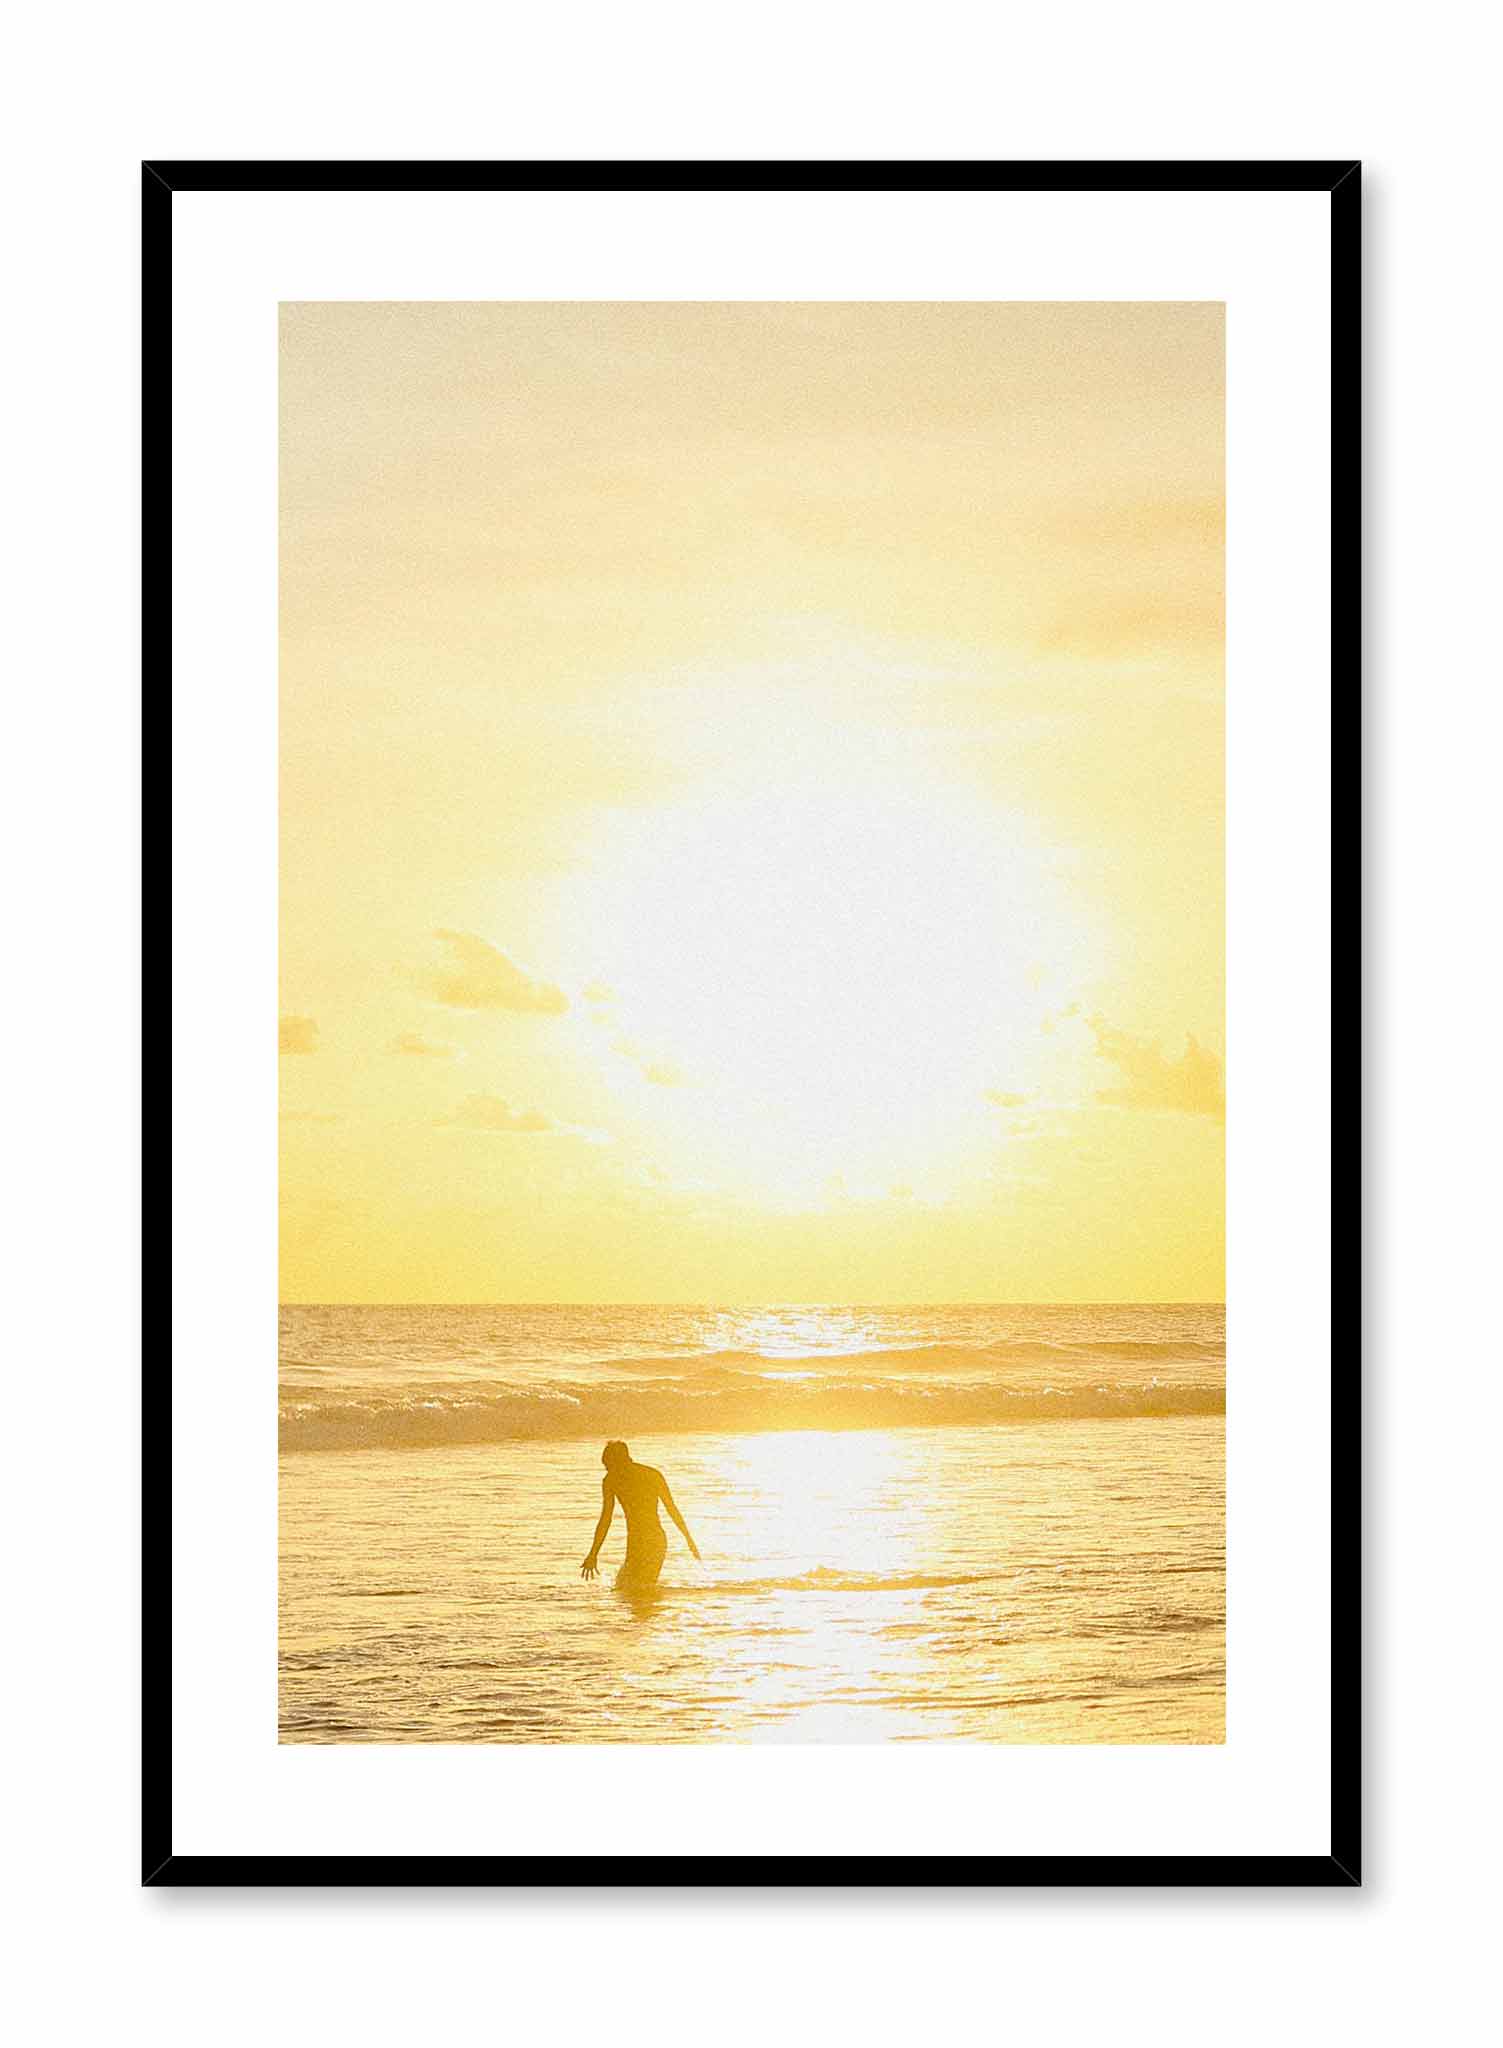 Golden Day is a minimalist lifestyle photography poster of a blinding sunset setting over the sea by Opposite Wall.